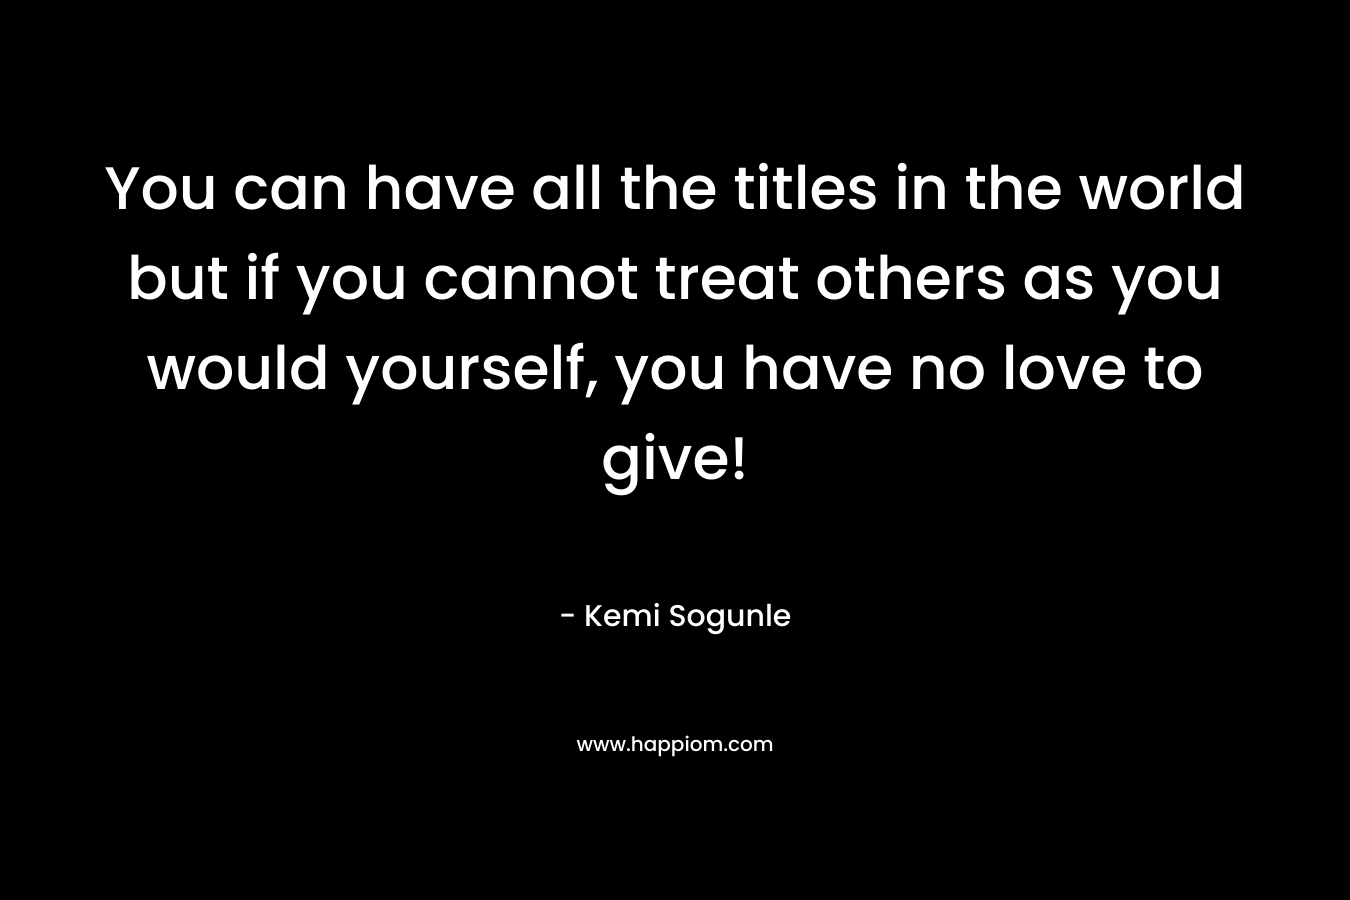 You can have all the titles in the world but if you cannot treat others as you would yourself, you have no love to give!